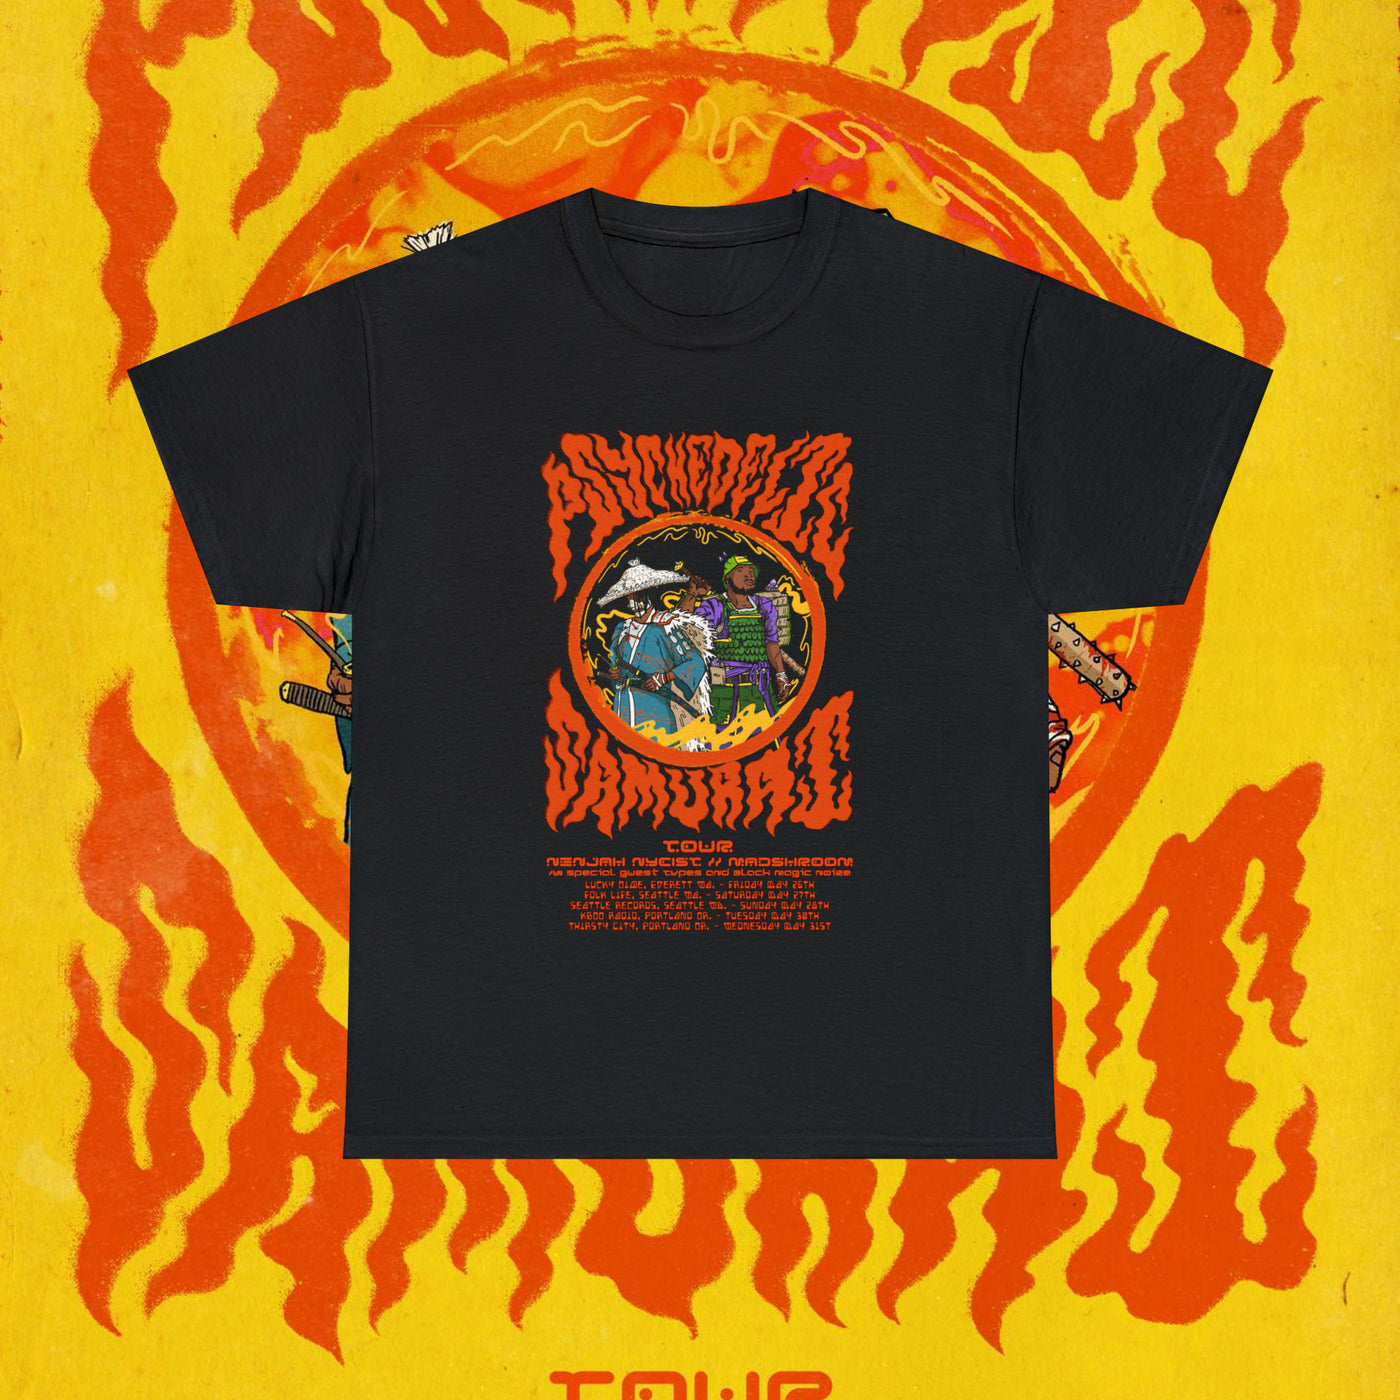 The "Psychedelic Samurai Experience" Tour Tee